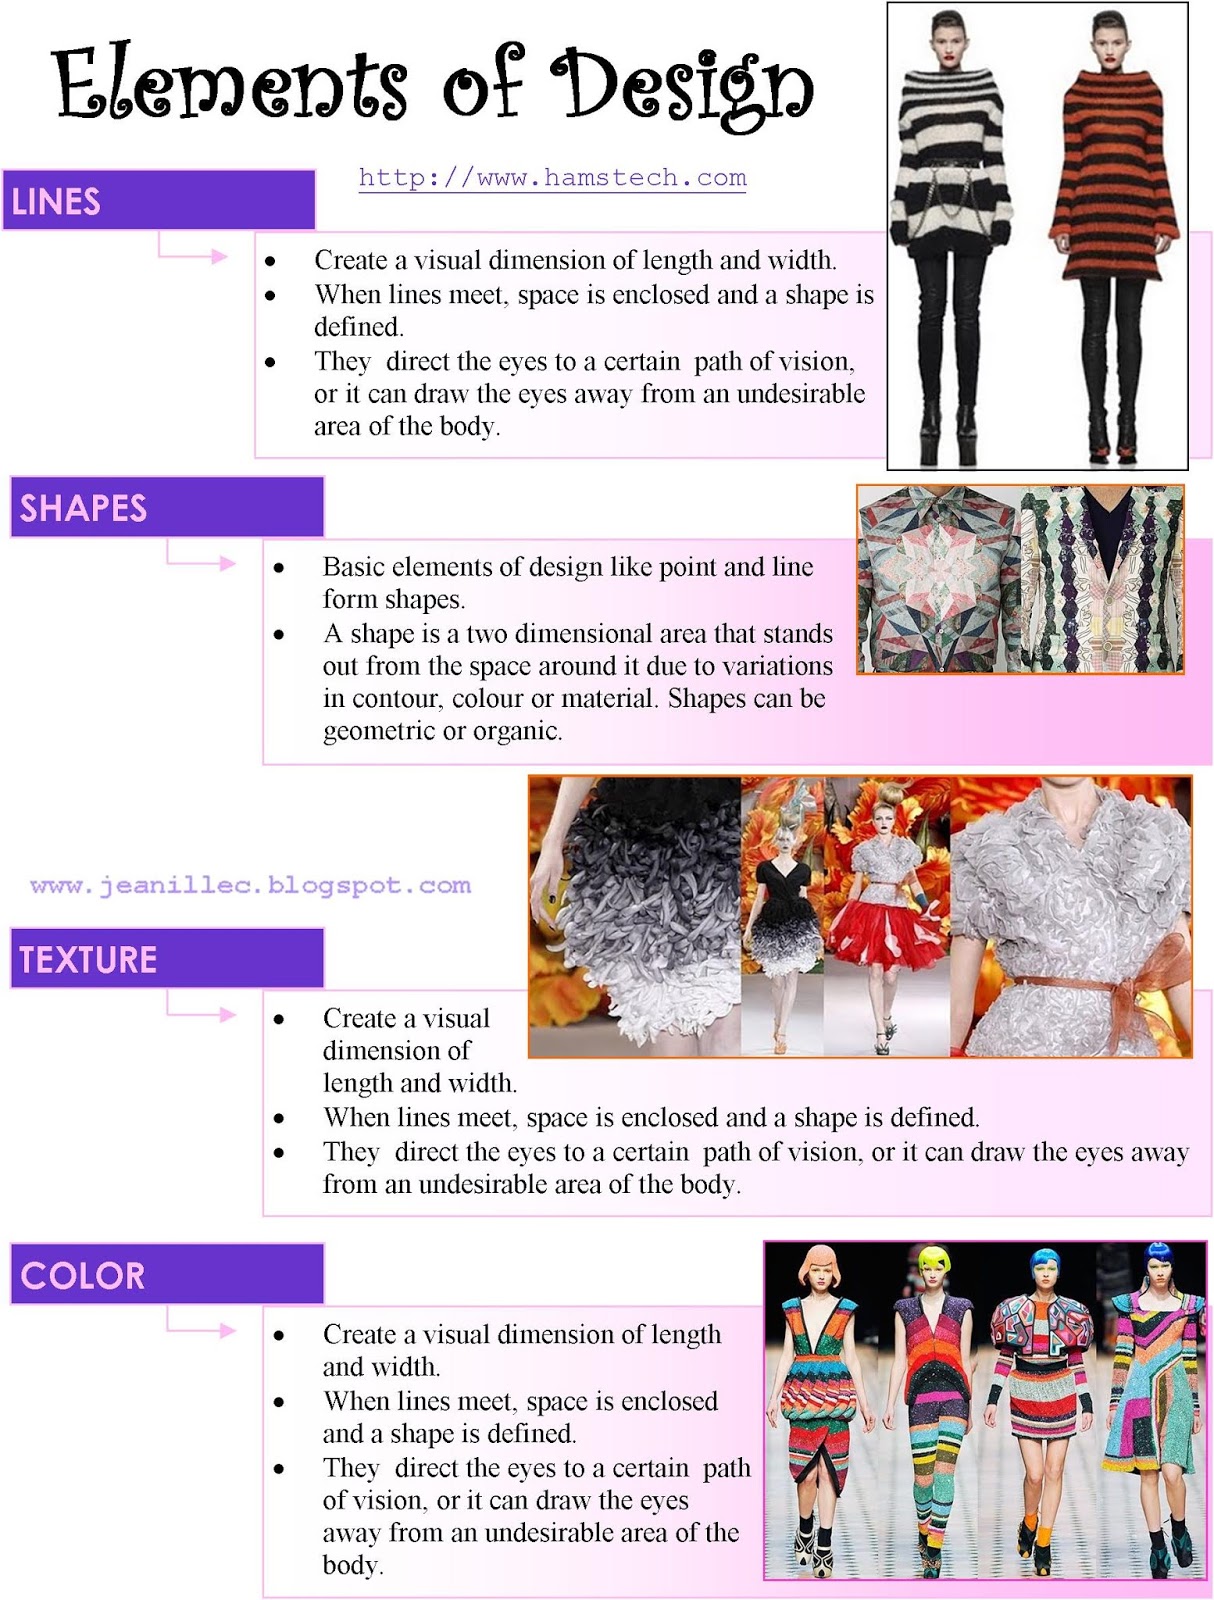 Elements of Design in Fashion and Textiles - Textile Learner